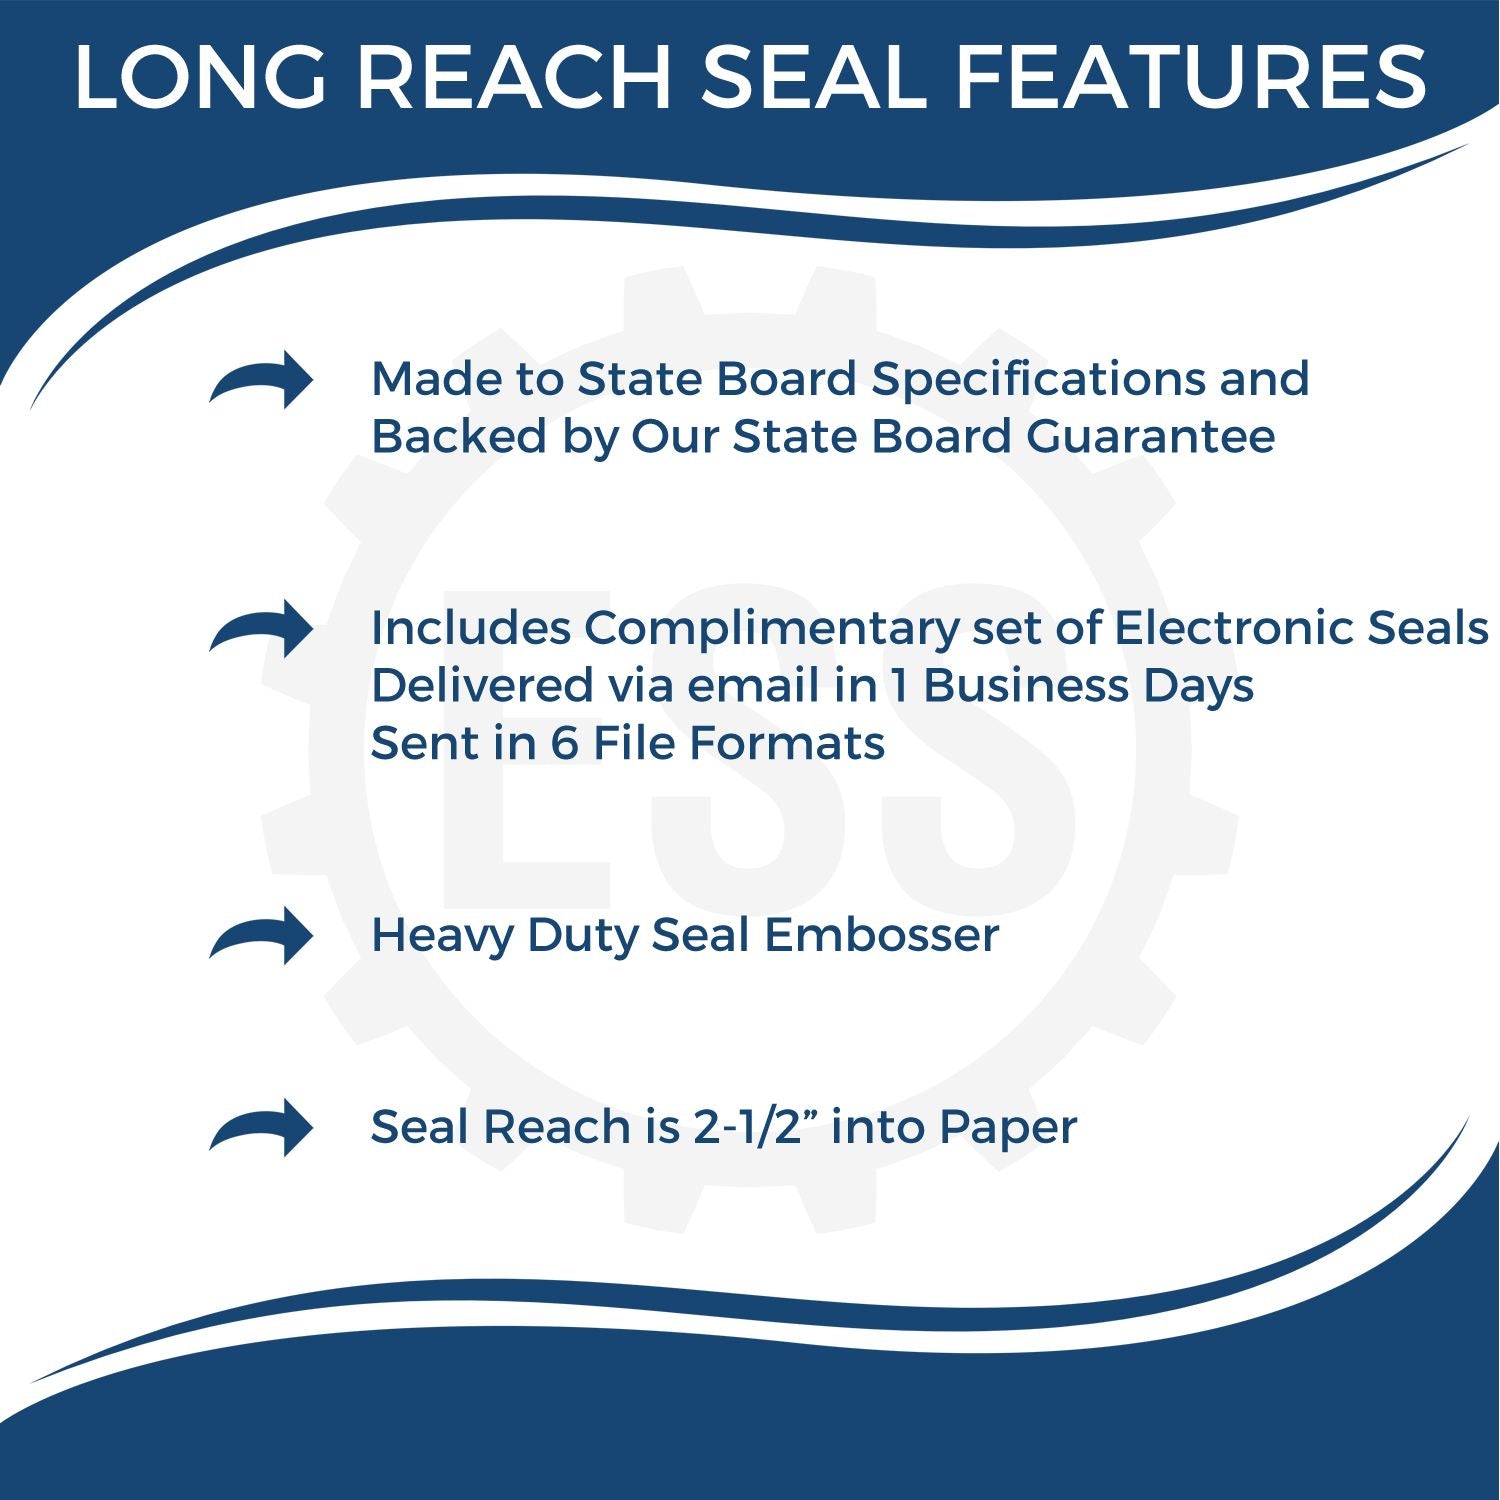 The main image for the Long Reach Kentucky PE Seal depicting a sample of the imprint and electronic files